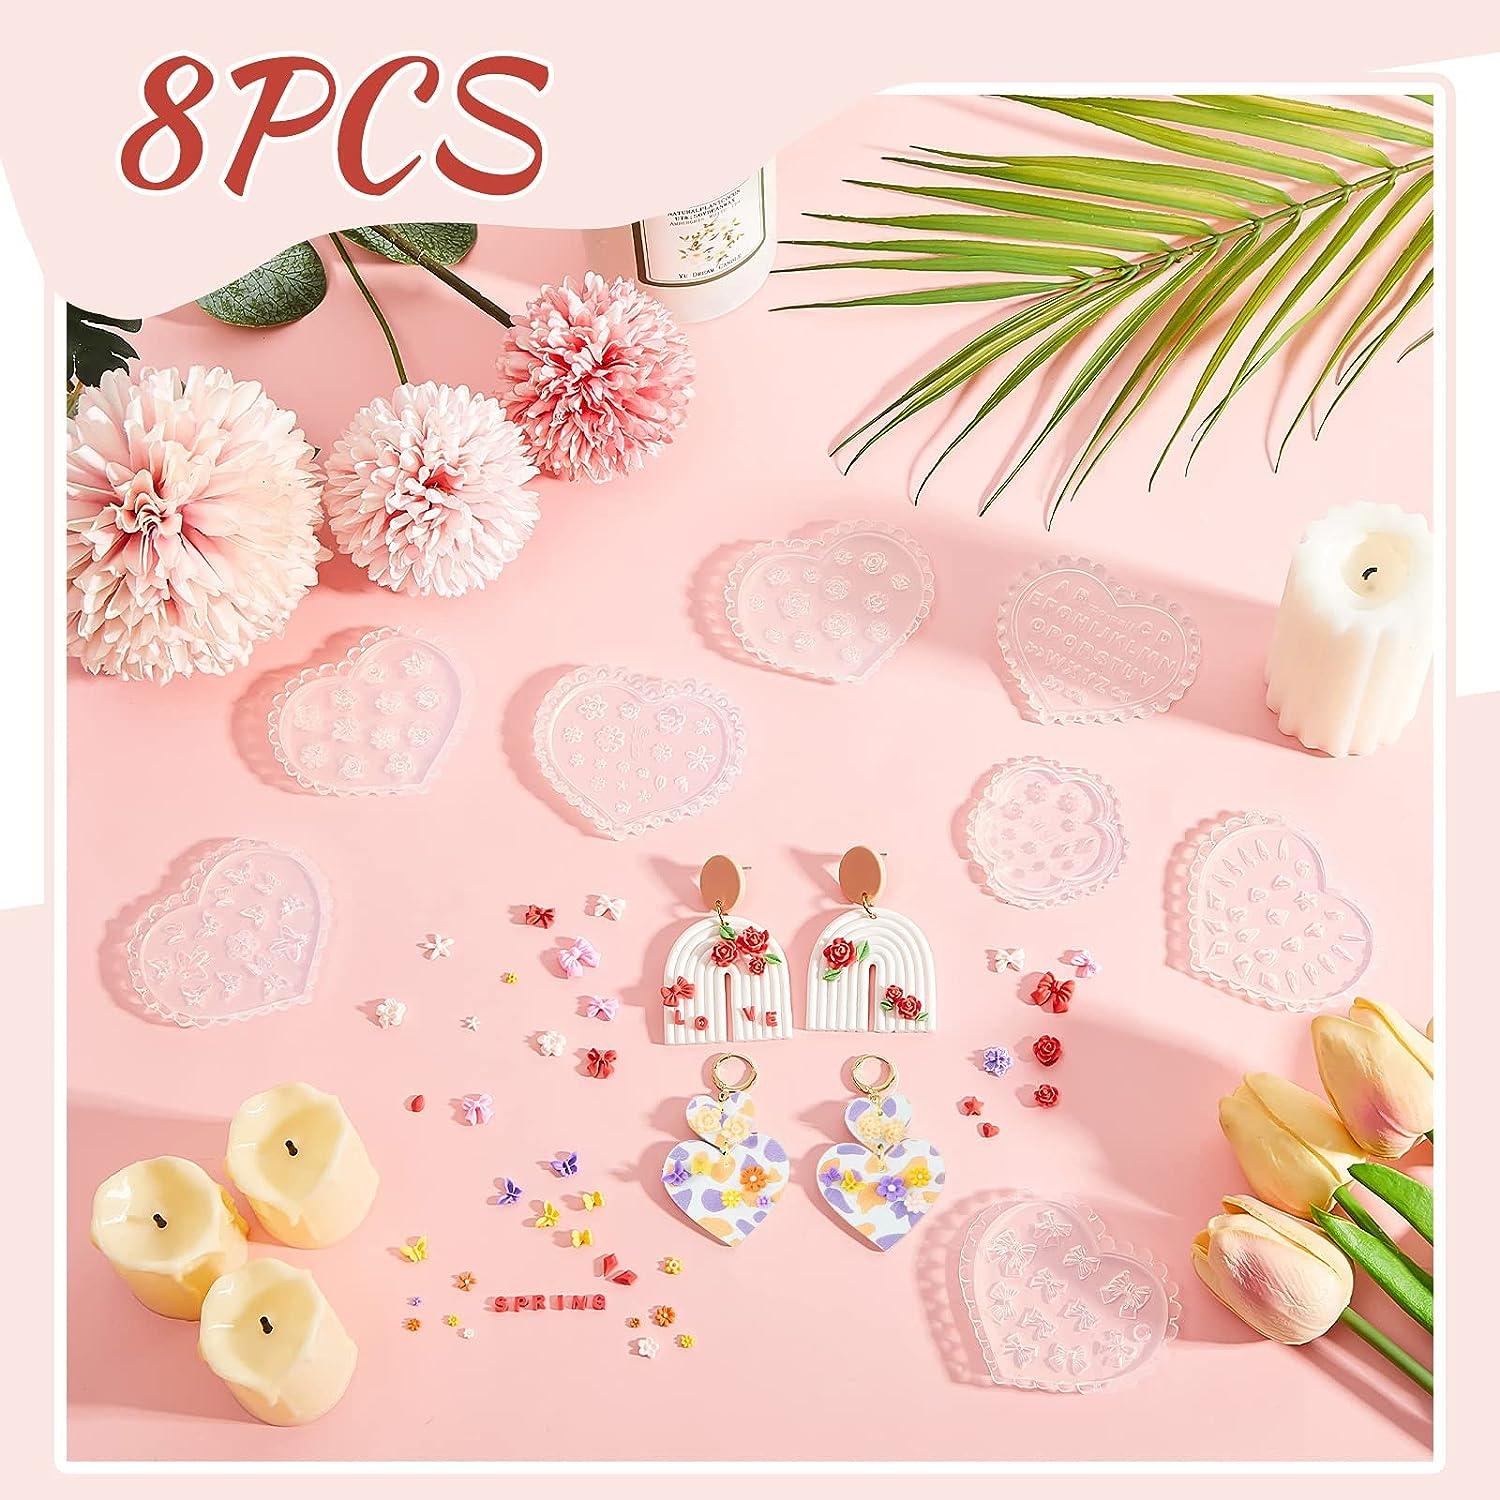  Puocaon Potted Plant Clay Stamps - 12 Pcs Acrylic Clear  Debossing Plate for Polymer Clay Jewelry, Cute Flower Texture Stamps for  Clay Earrings Making, 2 Pcs Square Polymer Clay Jewelry